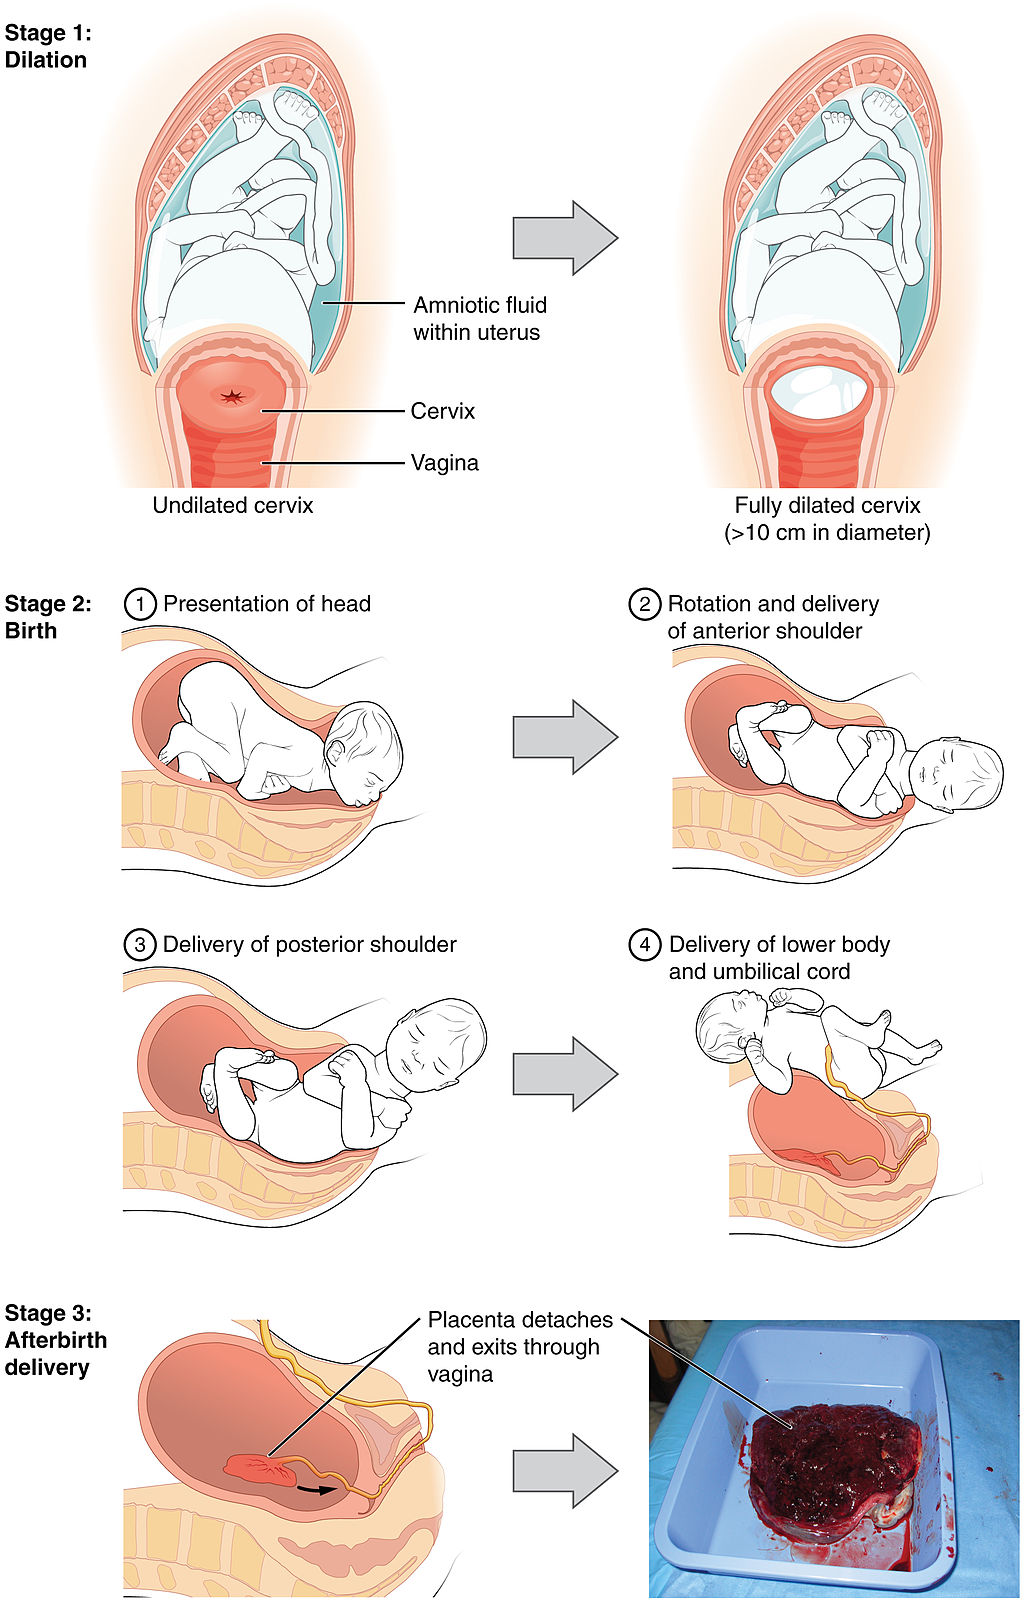 18.7.6 Stages of Labor